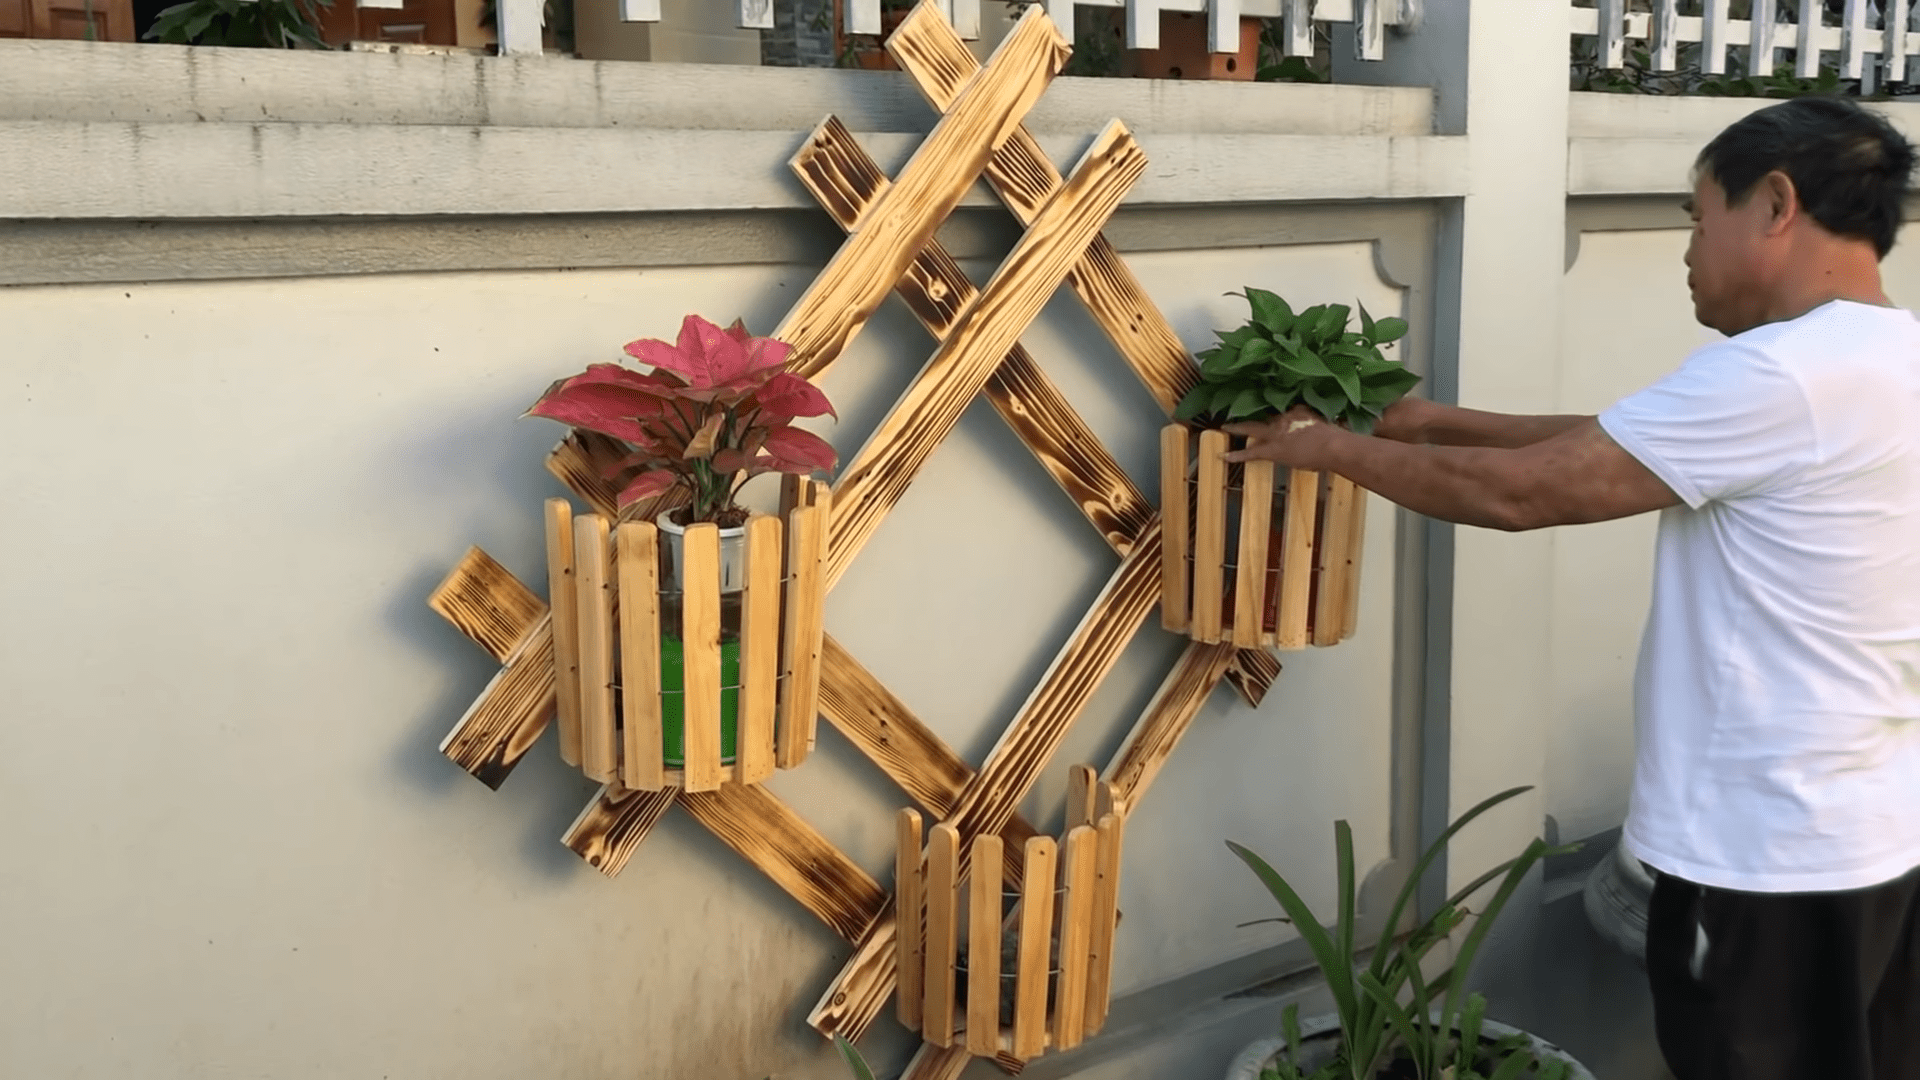 Woodworking Project From Pallet Wood How To Make A Great Wall Mounted Flower Shelf DIY 14 17 screenshot 1